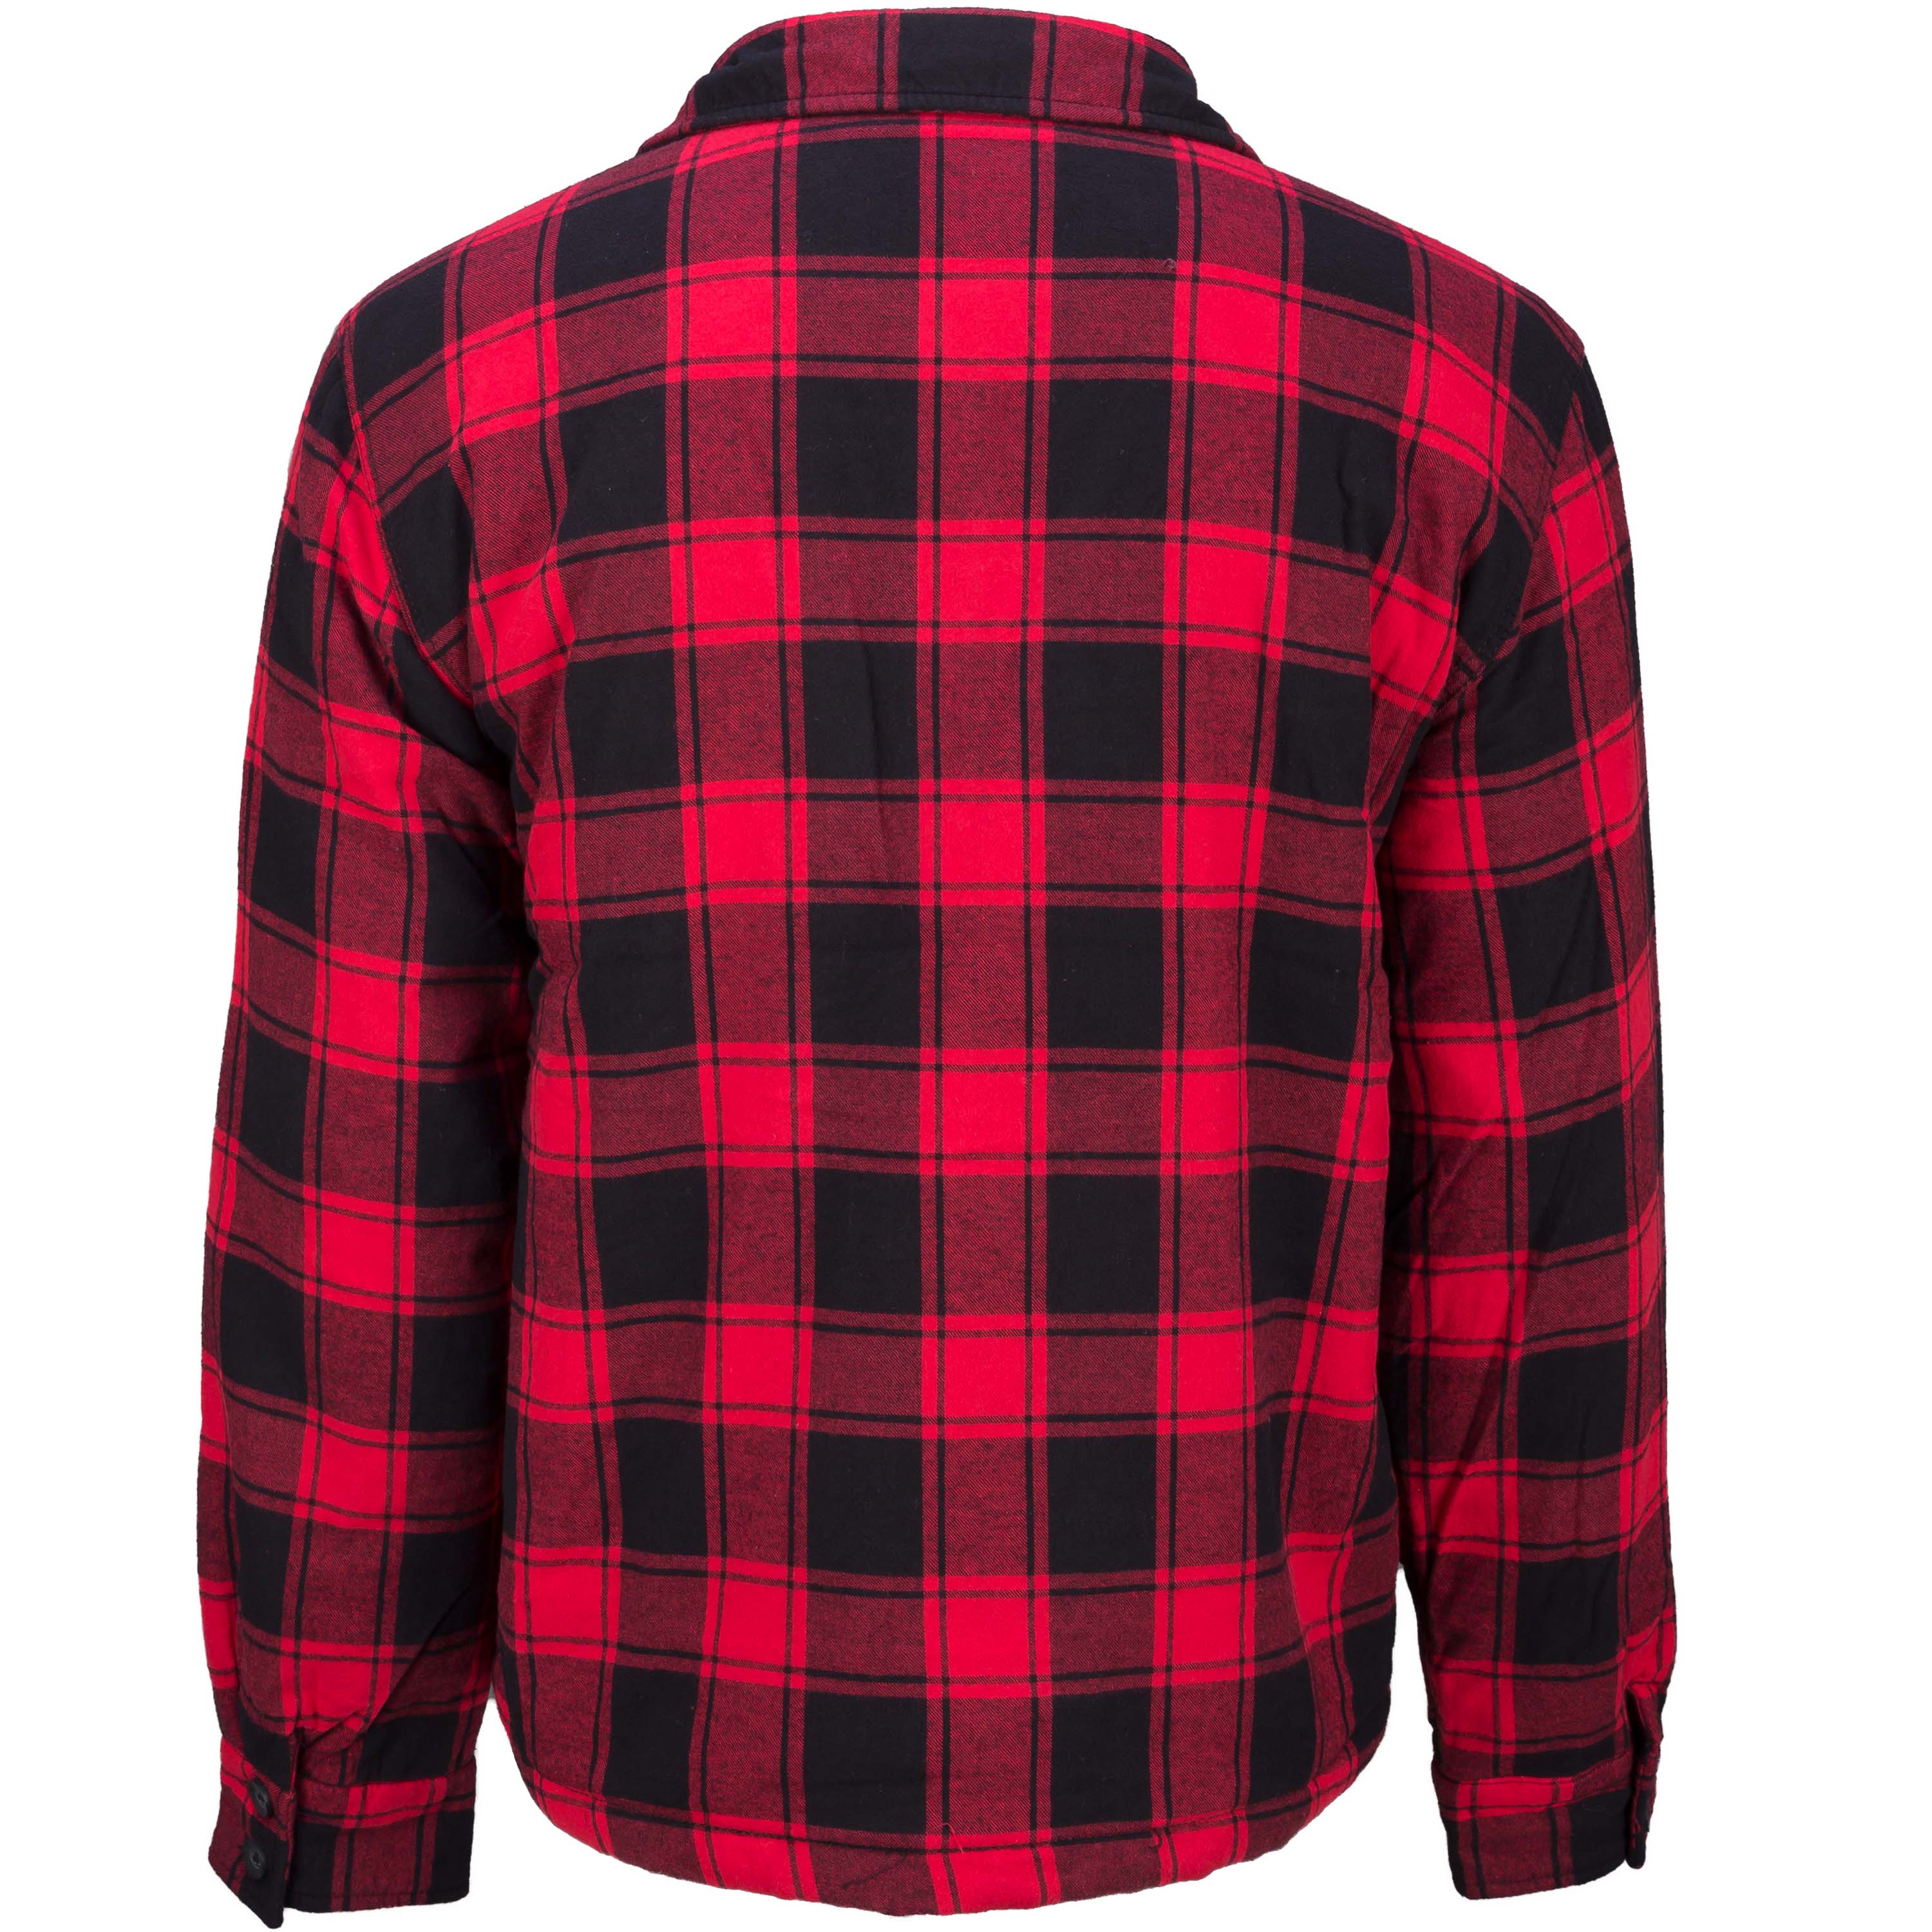 Purchase the Brandit Lumber Jacket Checked red/black by ASMC